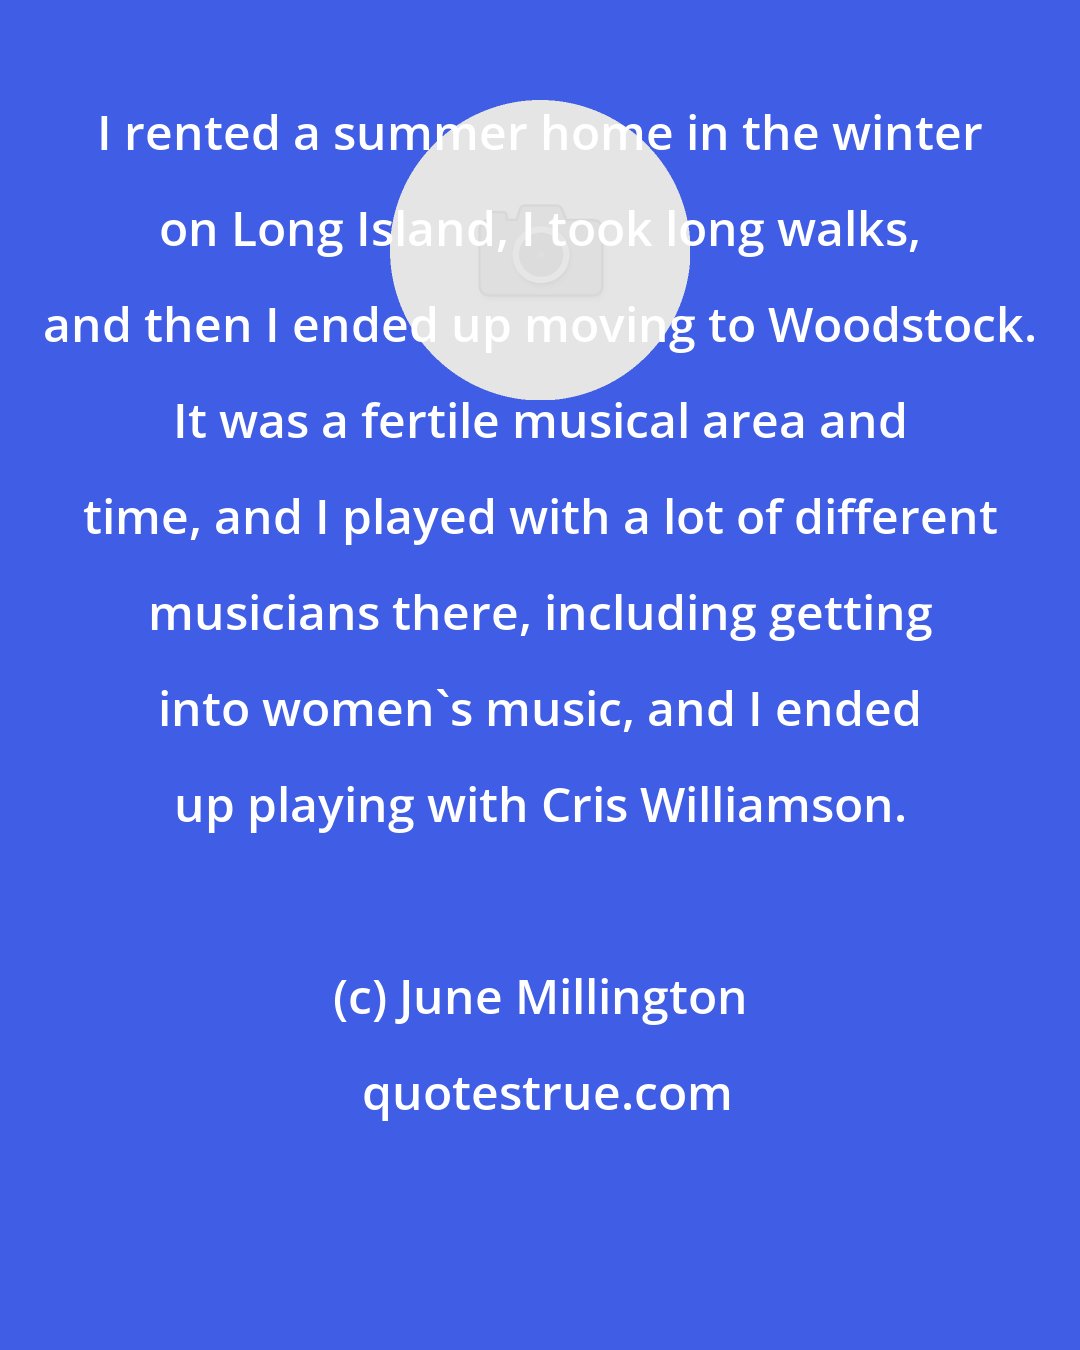 June Millington: I rented a summer home in the winter on Long Island, I took long walks, and then I ended up moving to Woodstock. It was a fertile musical area and time, and I played with a lot of different musicians there, including getting into women's music, and I ended up playing with Cris Williamson.